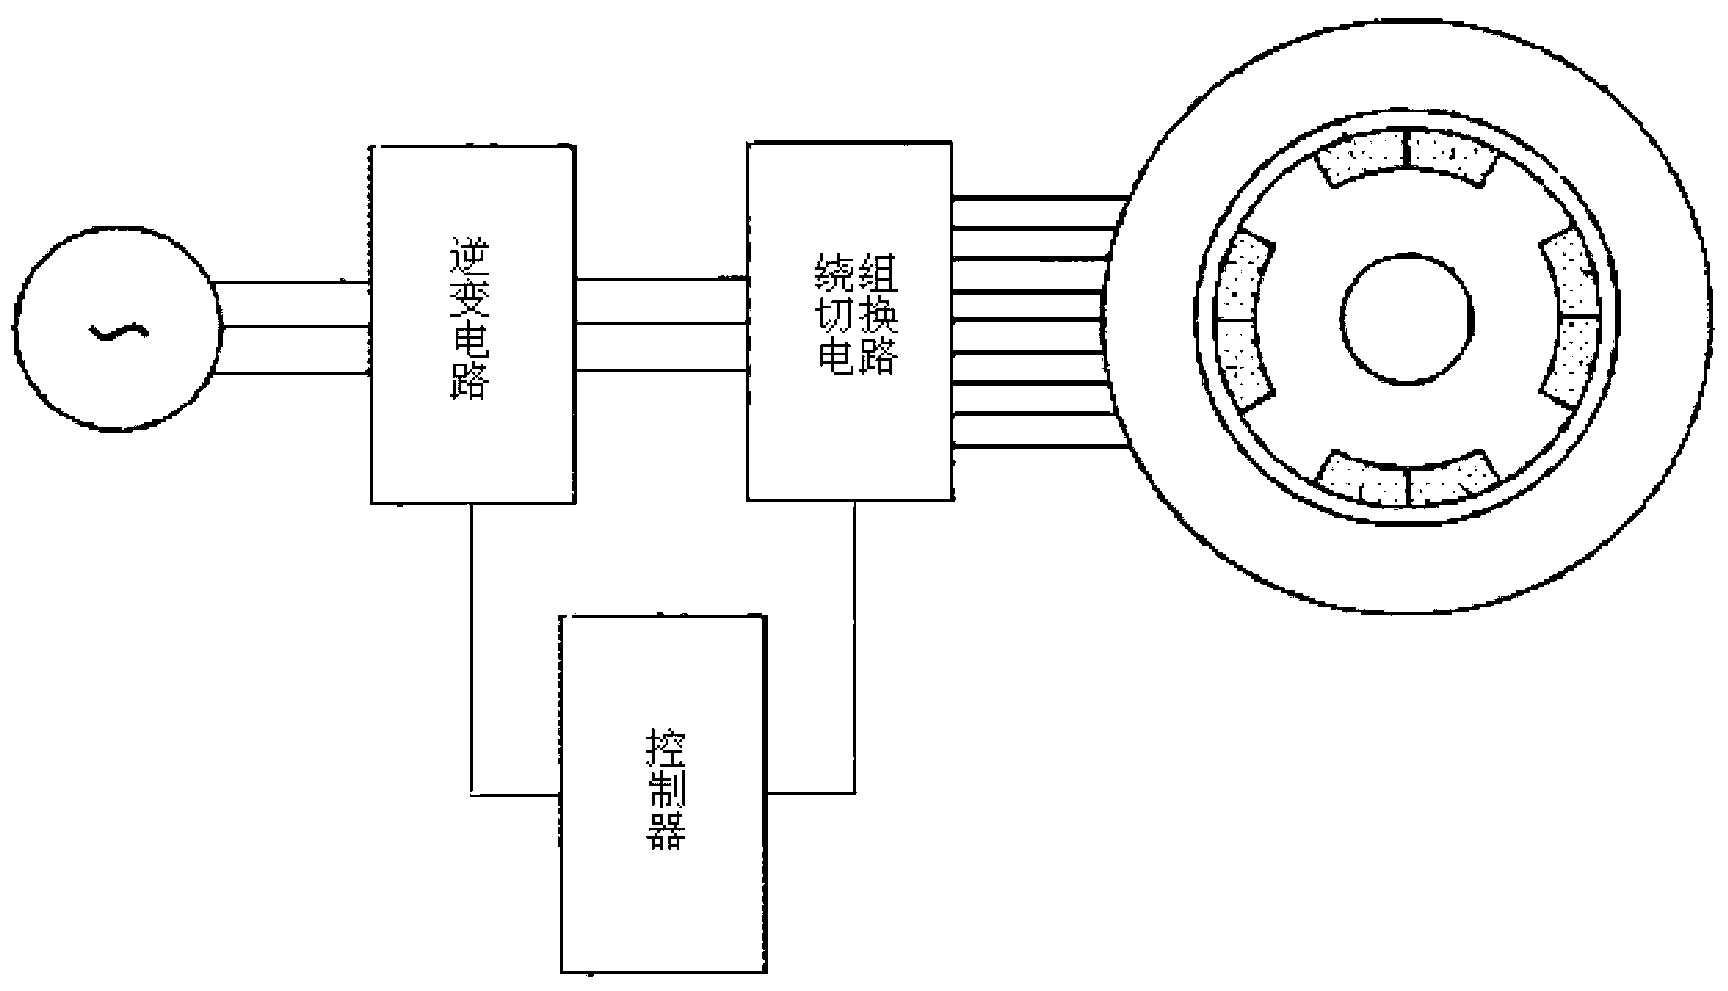 Pole-changing control permanent magnet synchronous motor